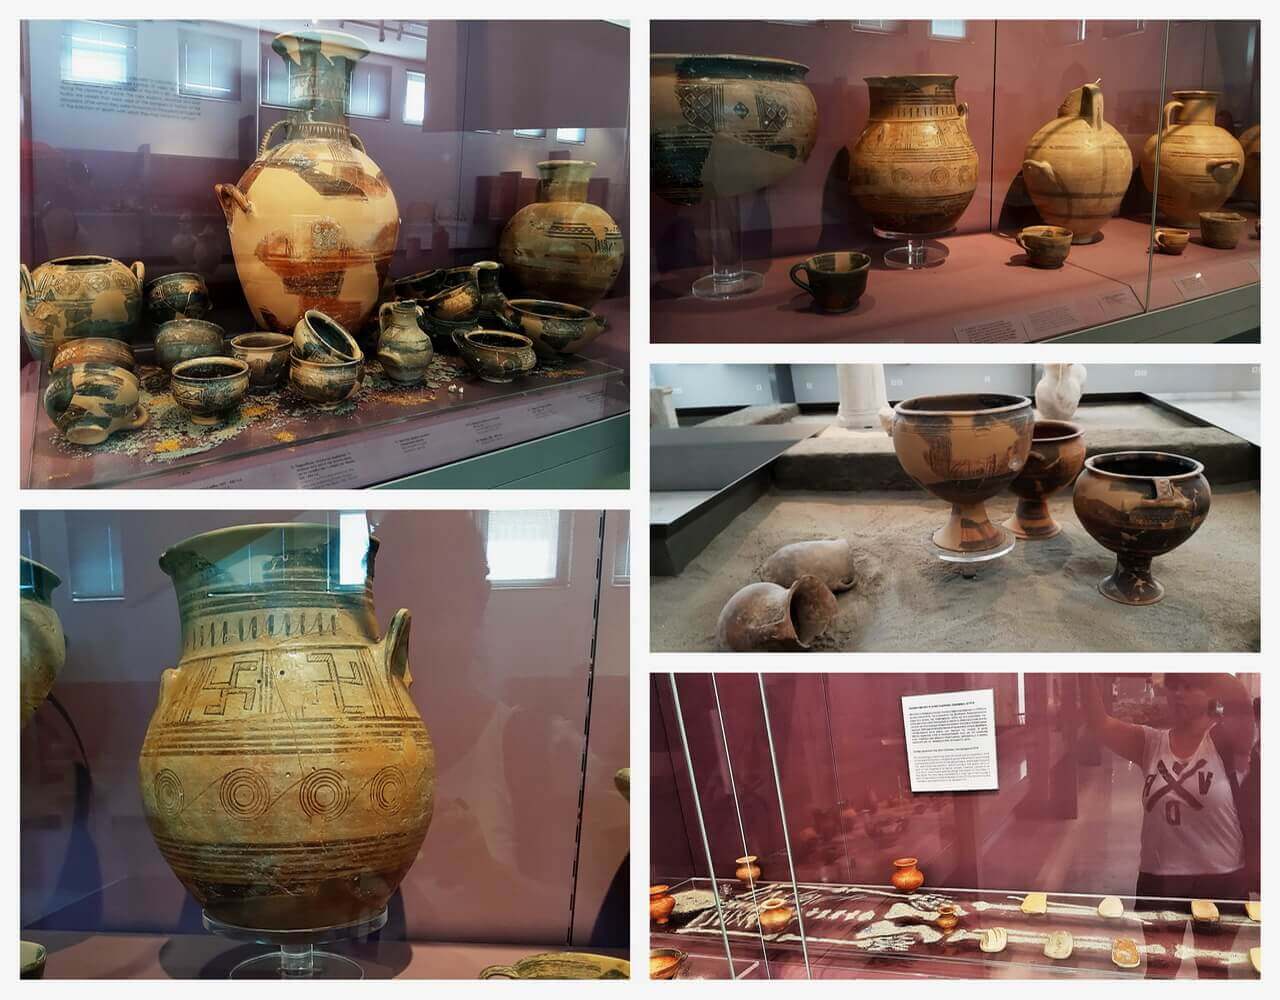 The ancient funeral pottery